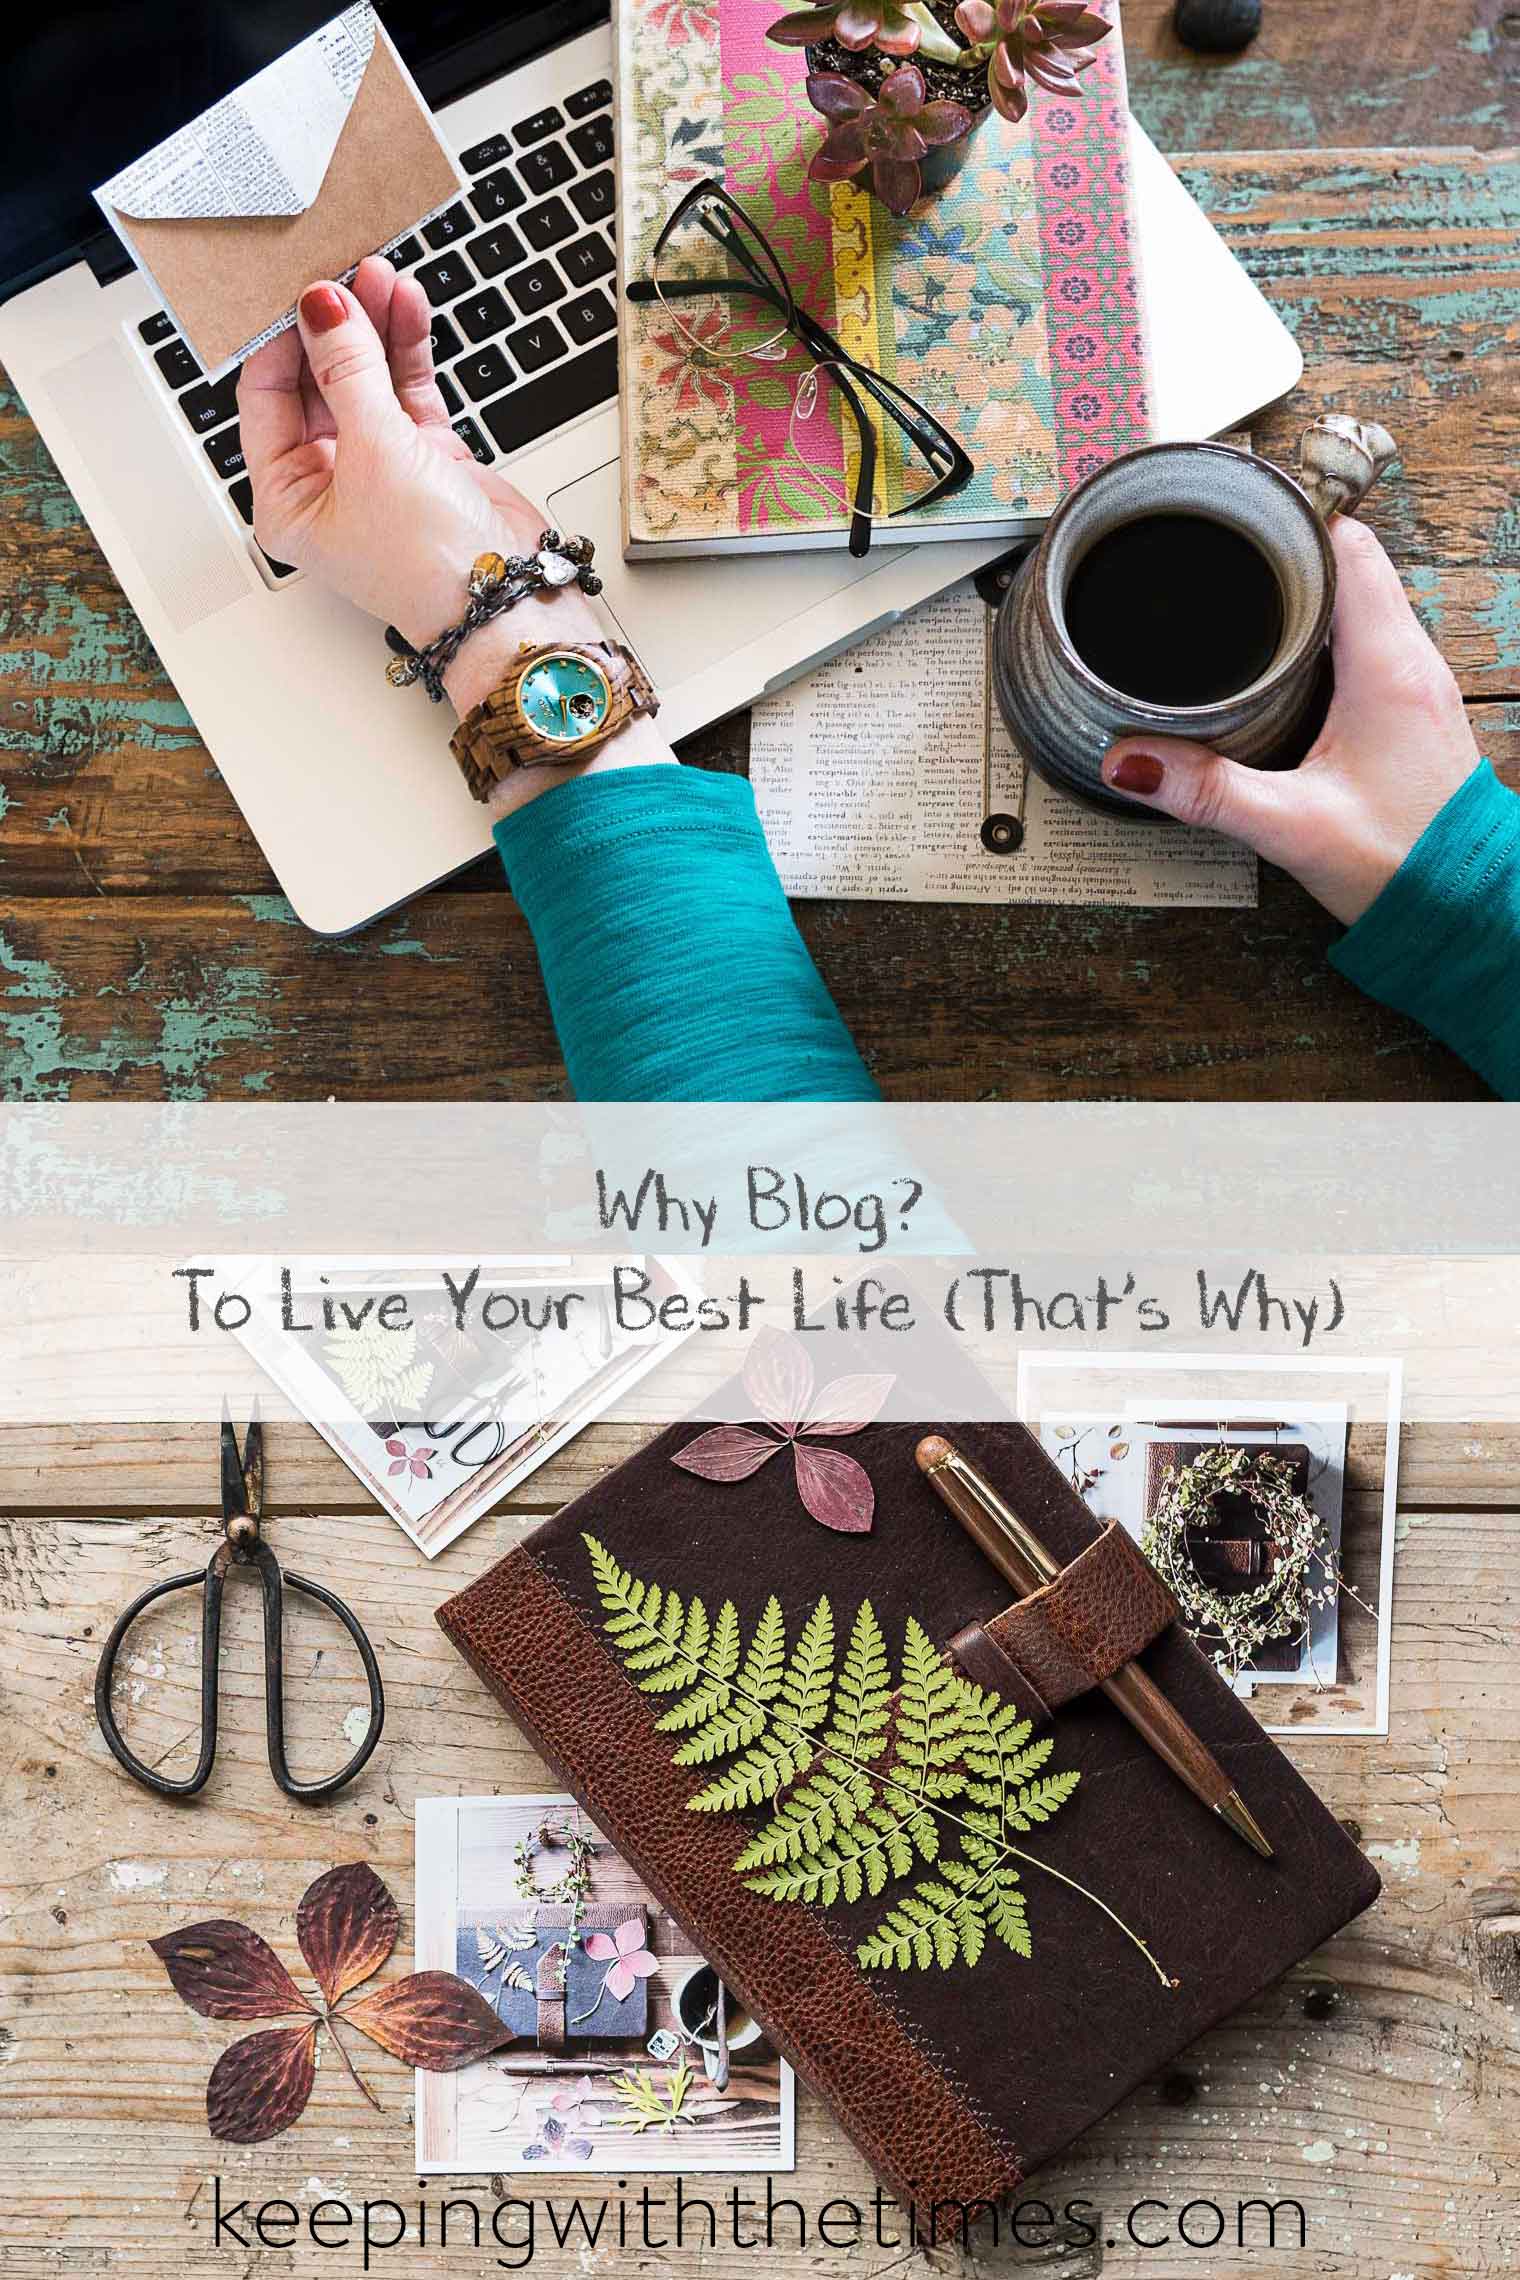 Why would I start a blog? What could I possibly have to offer that would be any different from the thousands upon thousands of other blogs out there in the world?